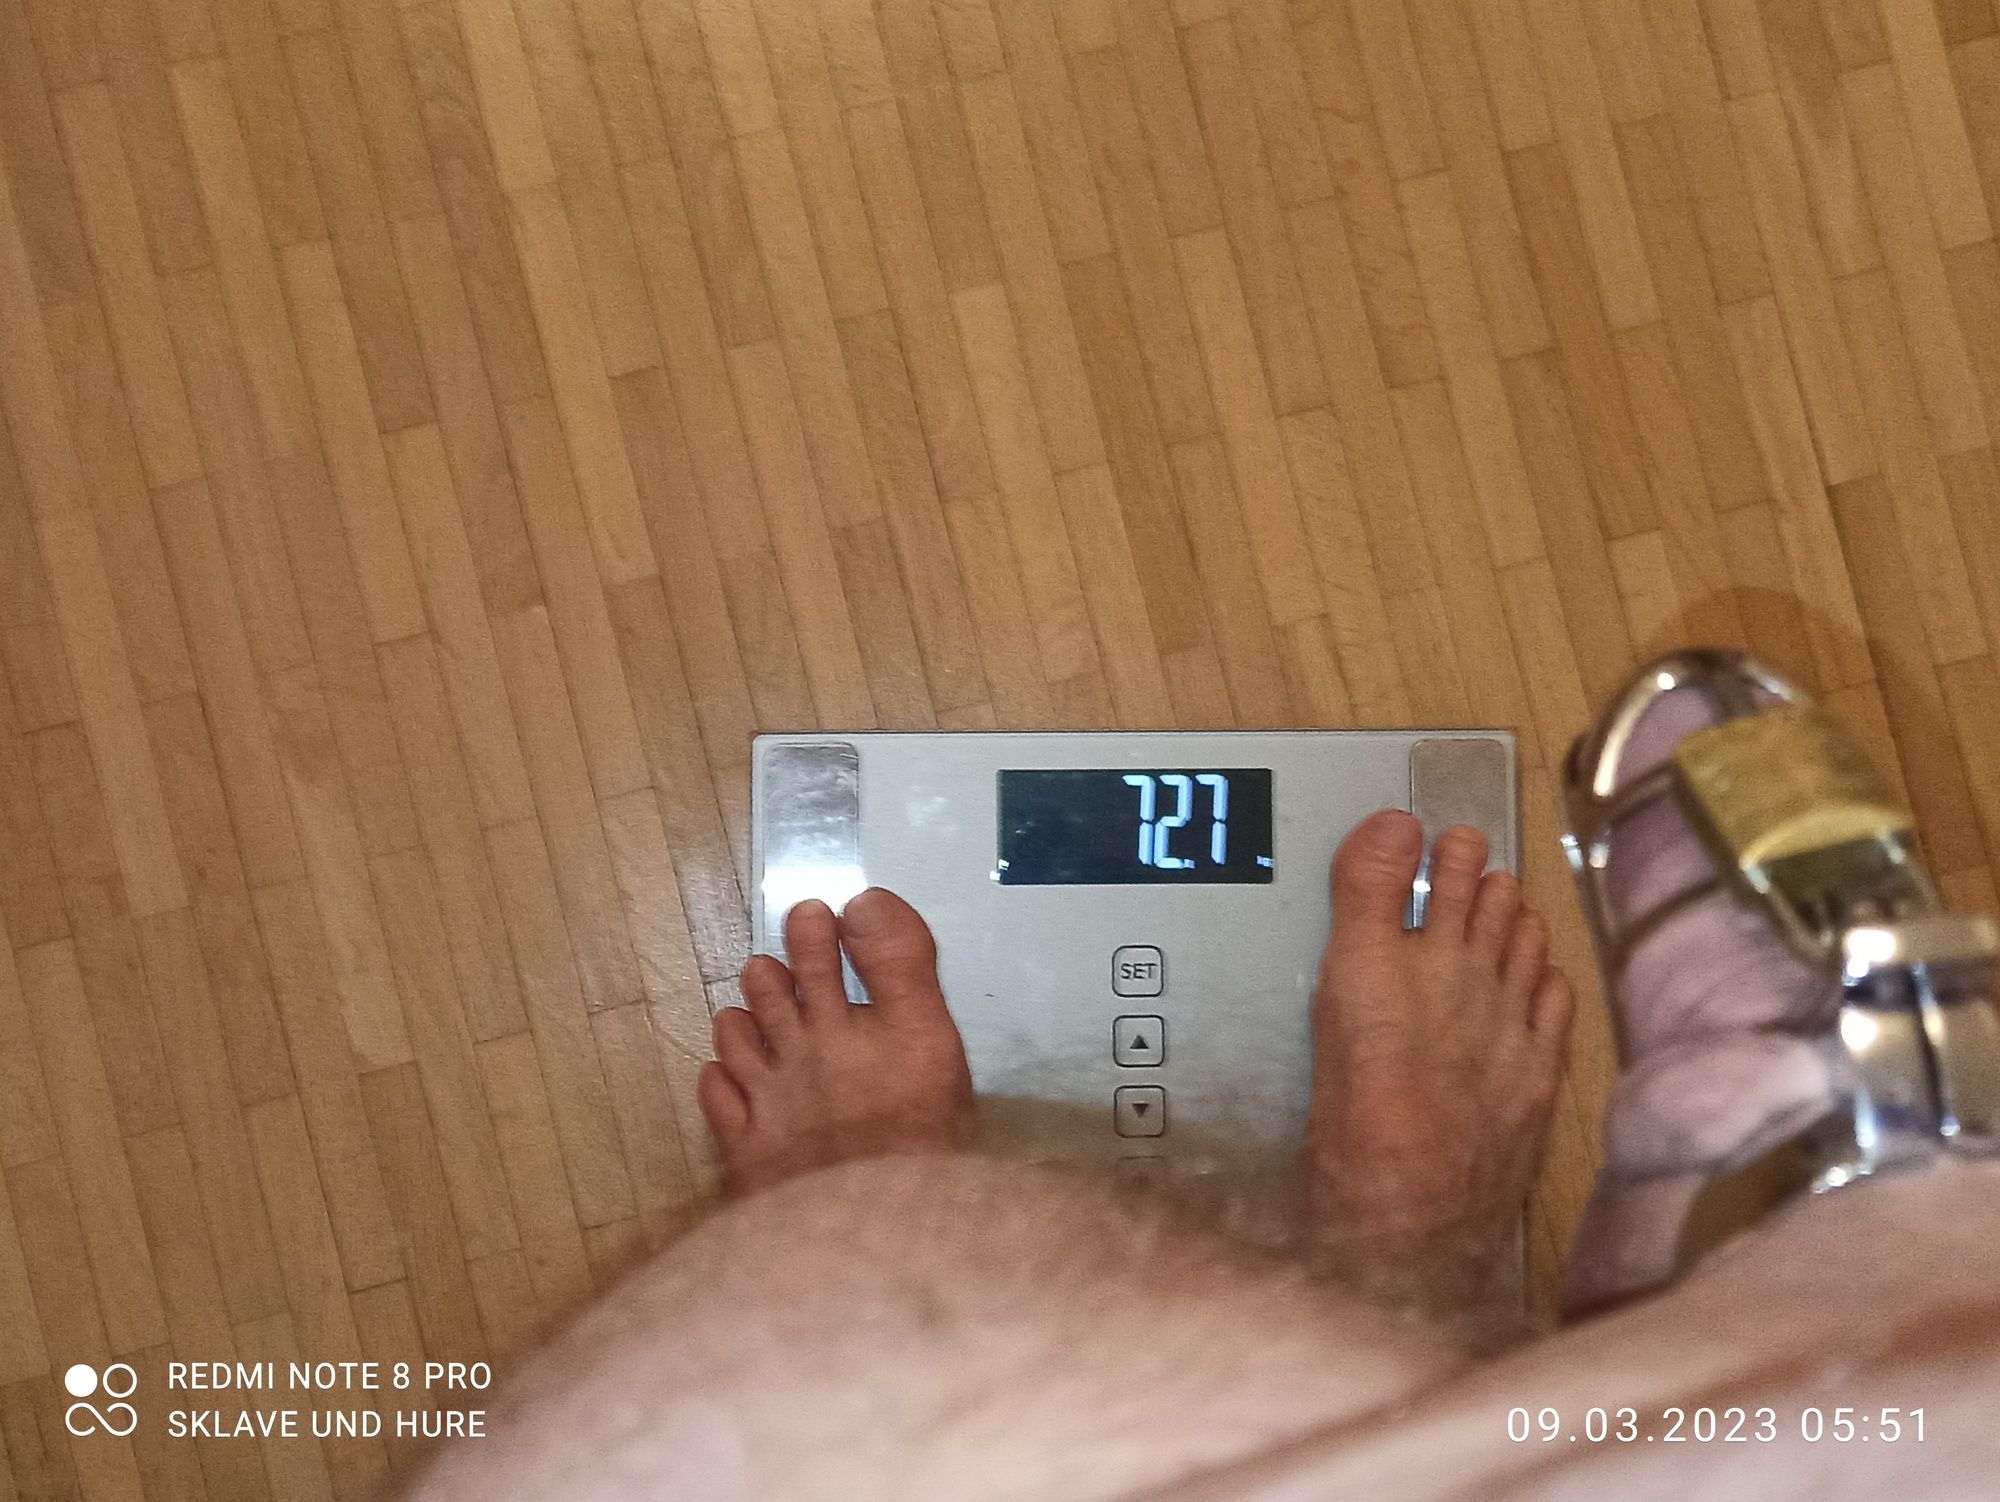 mandatory weighing and cagecheck of 09.03.2023